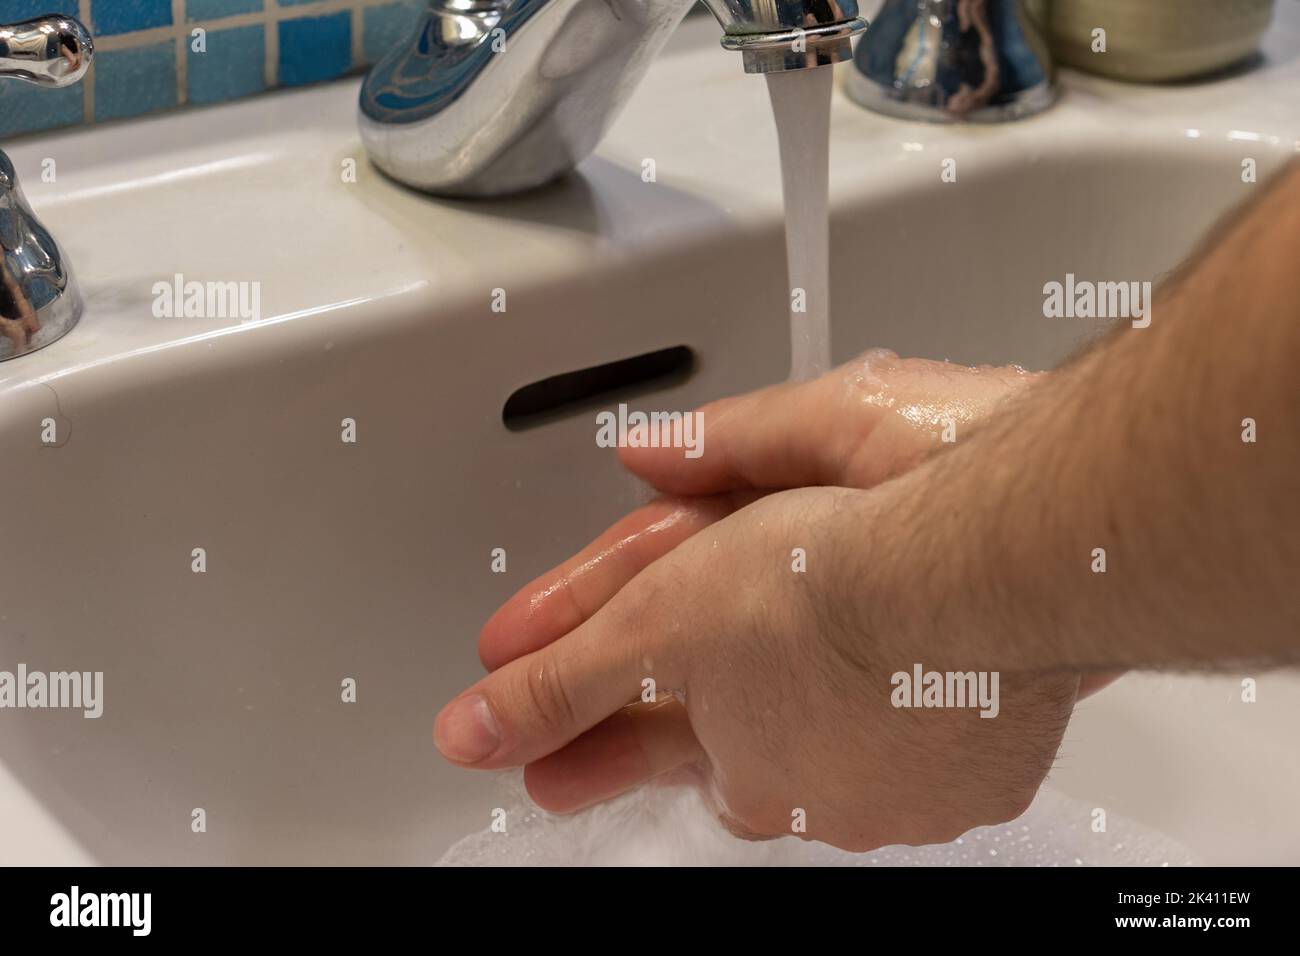 Caucasian man washing his hands with soap in an act of hygiene in a white sink with blue-toned tiles Stock Photo